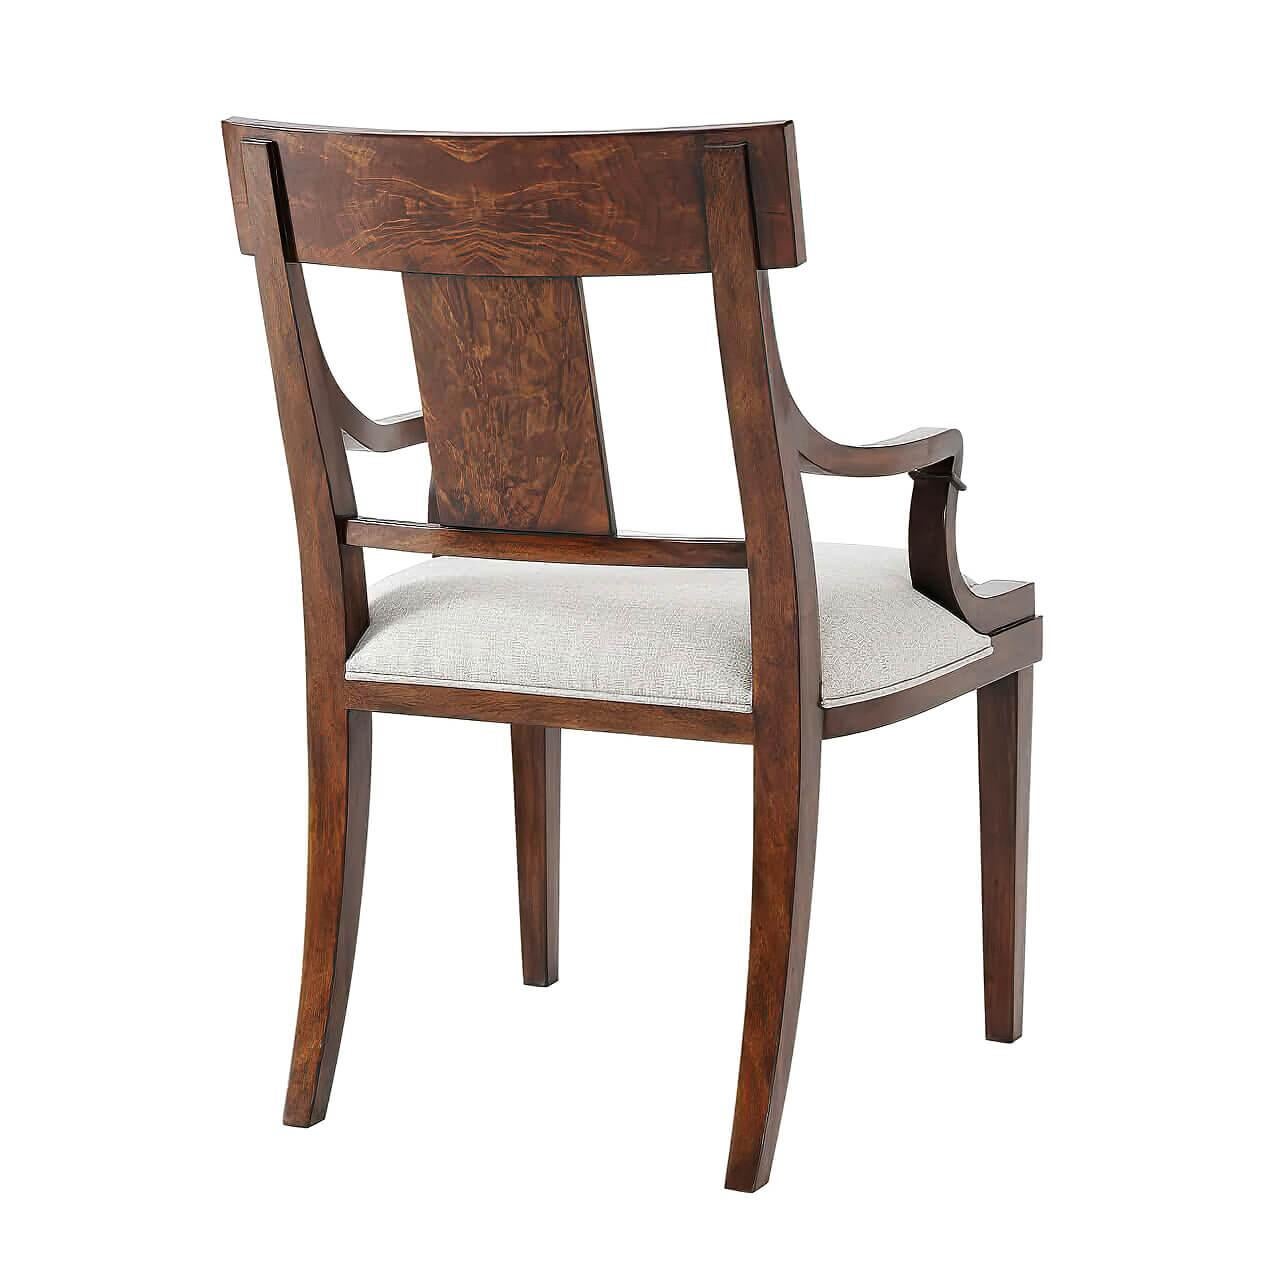 A Classic mahogany dining armchair, the flame mahogany veneered bar top rail and solid splat above an upholstered seat, on square tapering legs.

Dimensions: 23